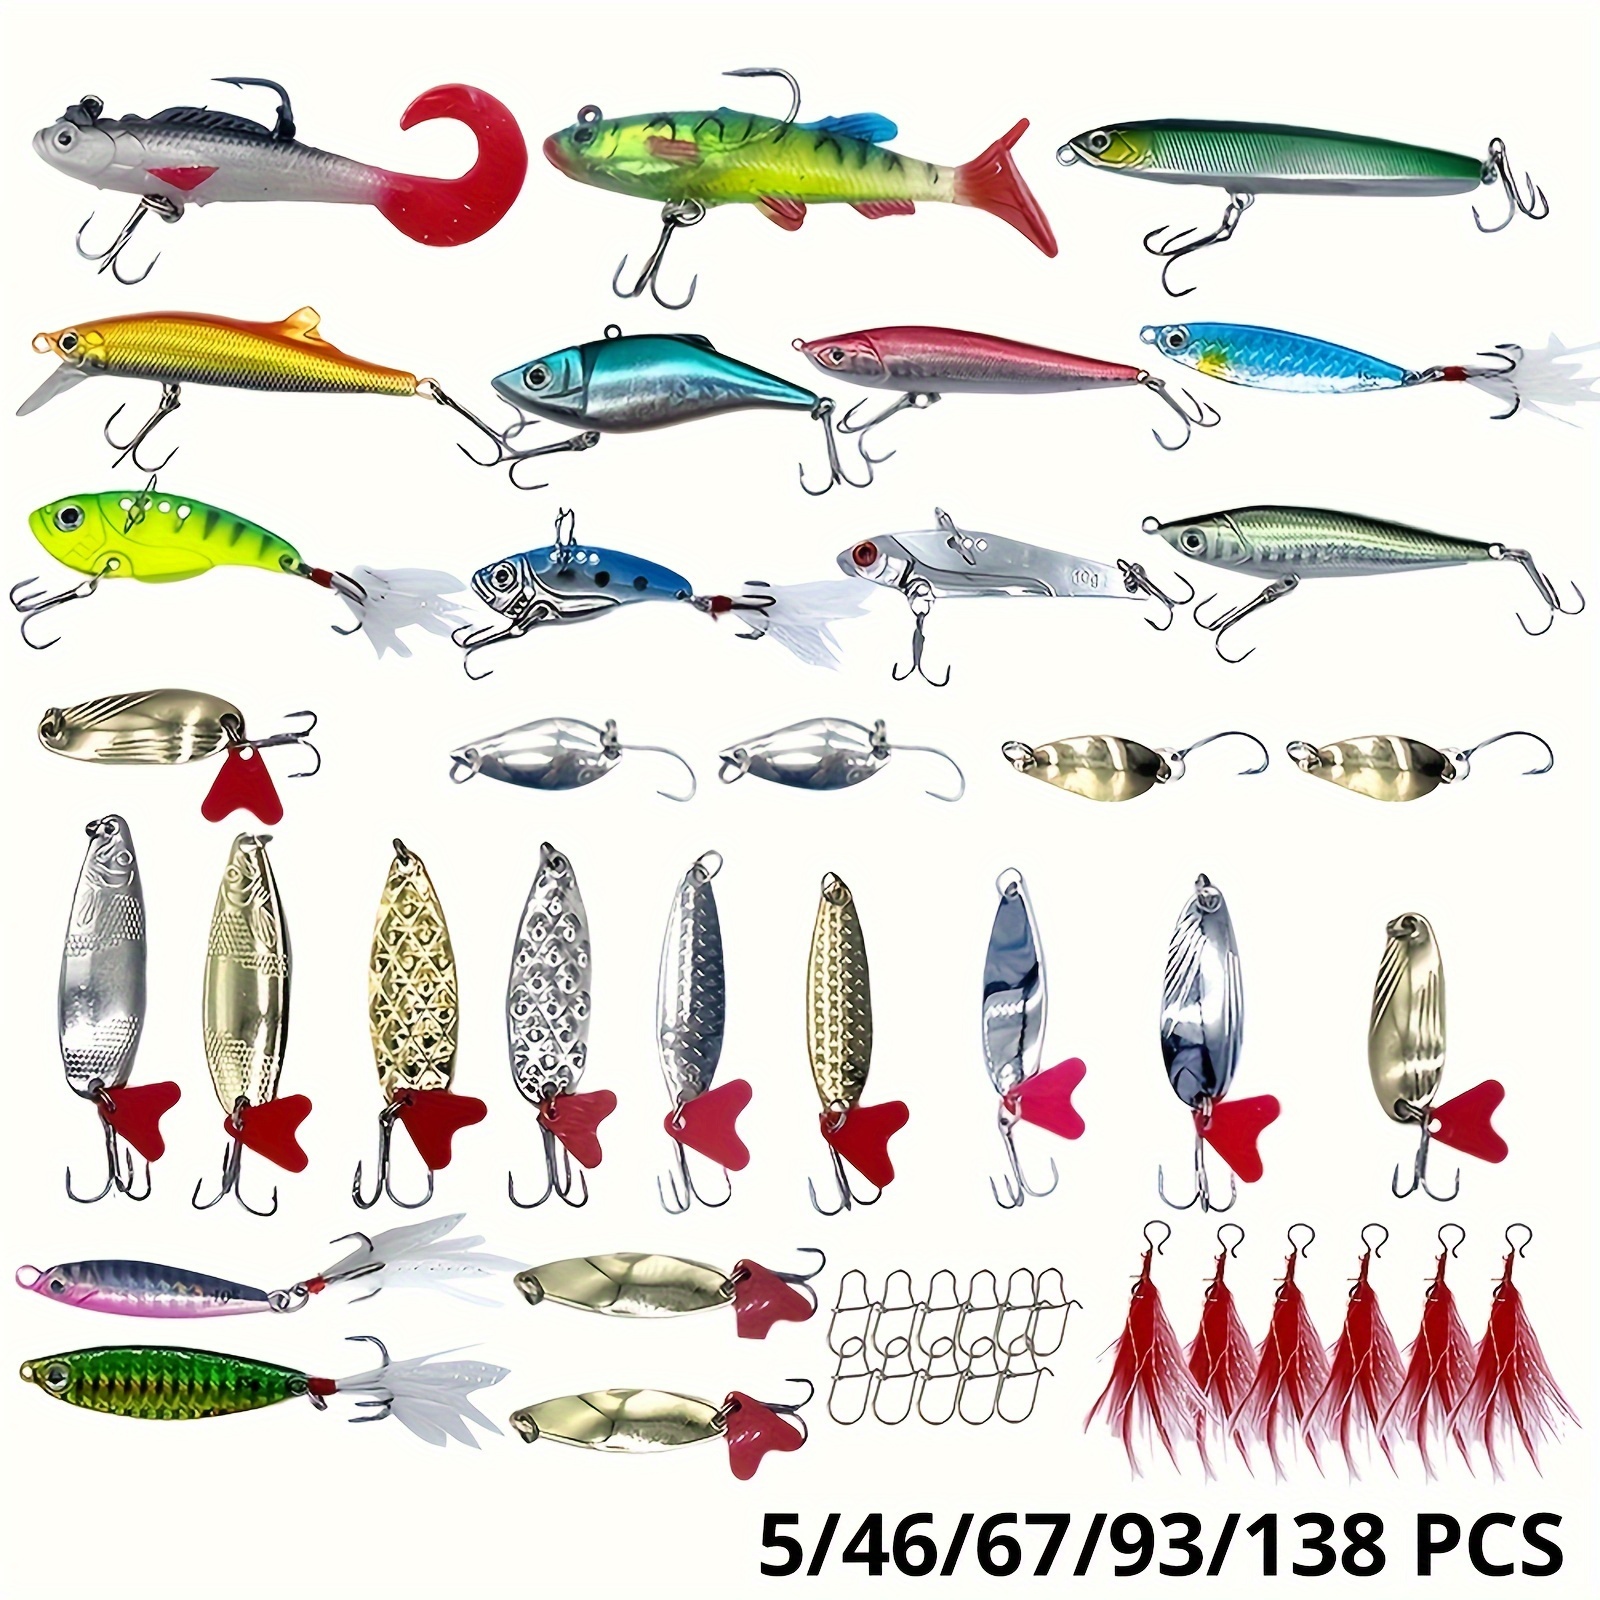 168PCS Fishing Lures Kit Set, Soft Hard Mixed Bait Tackle Kit with Free  Tackle Box, Including Spoon Lures Plastic Worms Fishing Hooks and More  Fishing